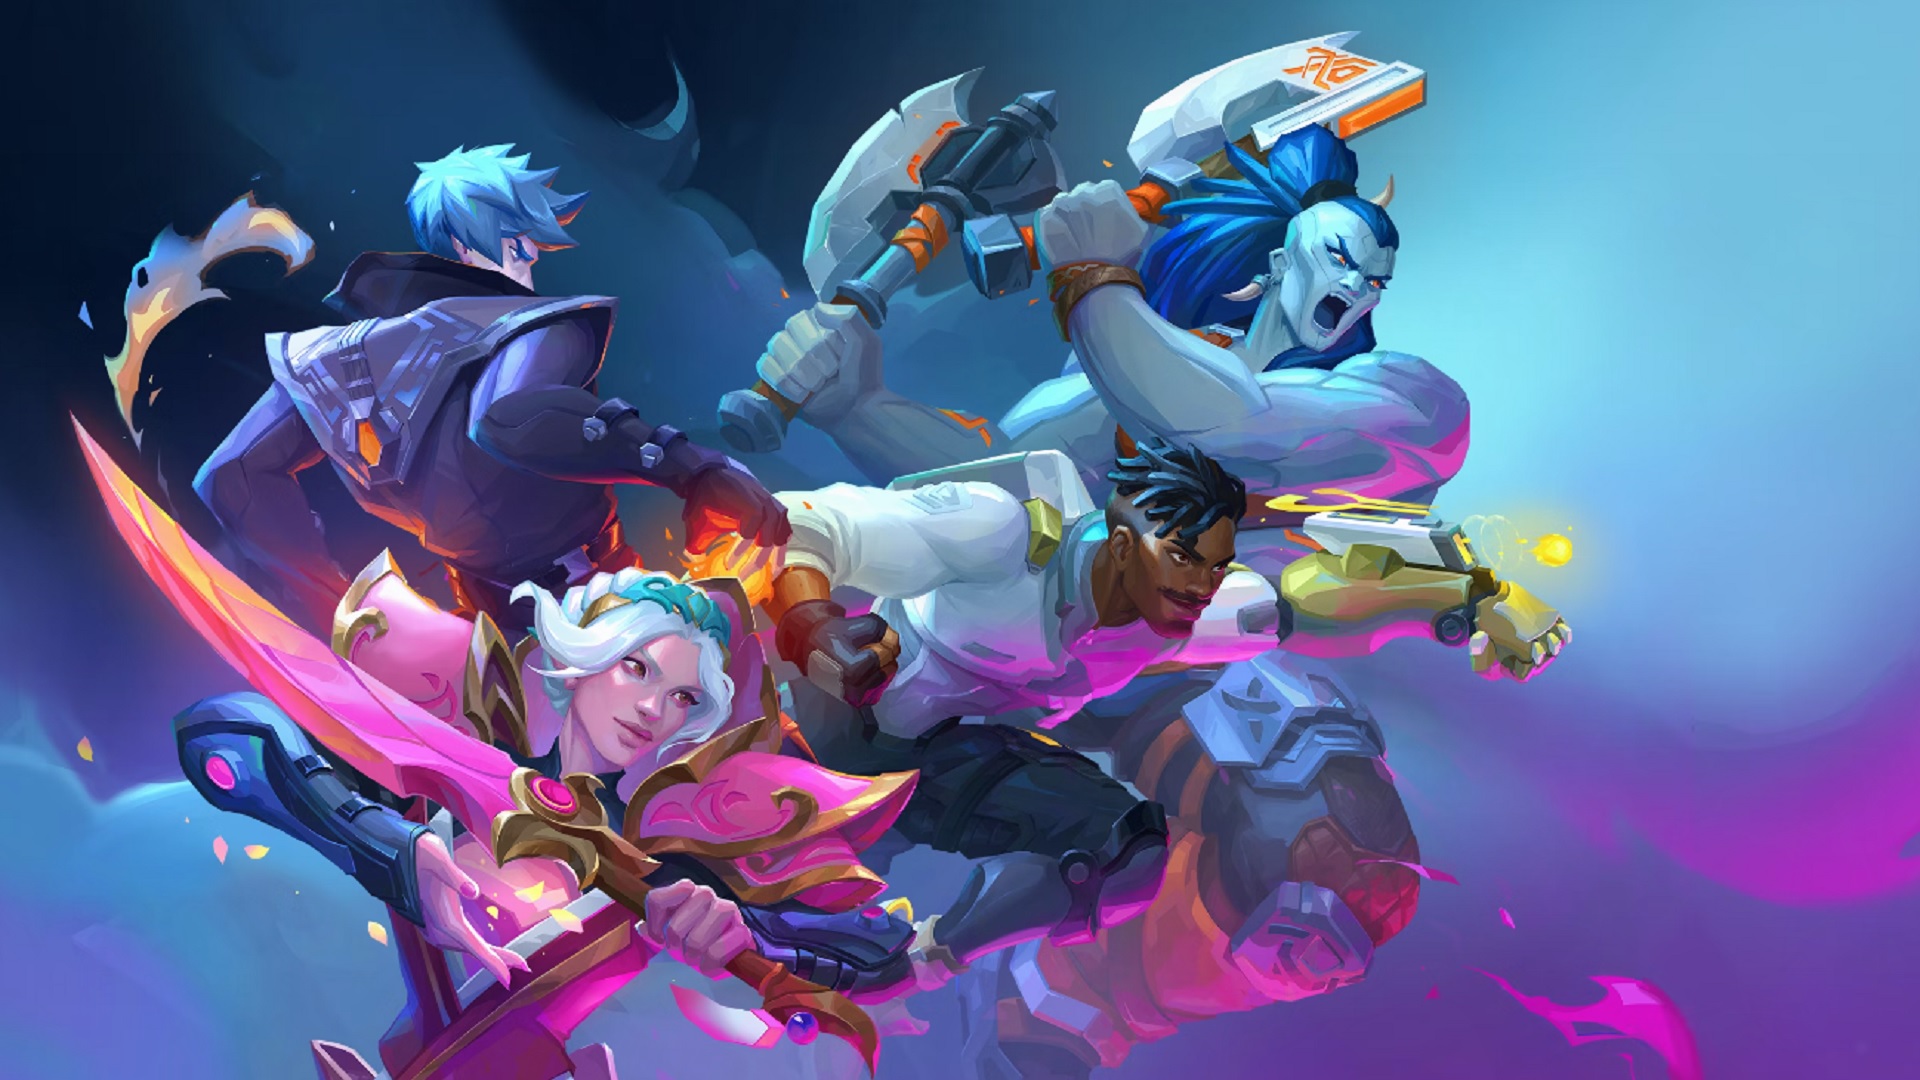 Evercore Heroes release date speculation, closed beta, and gameplay